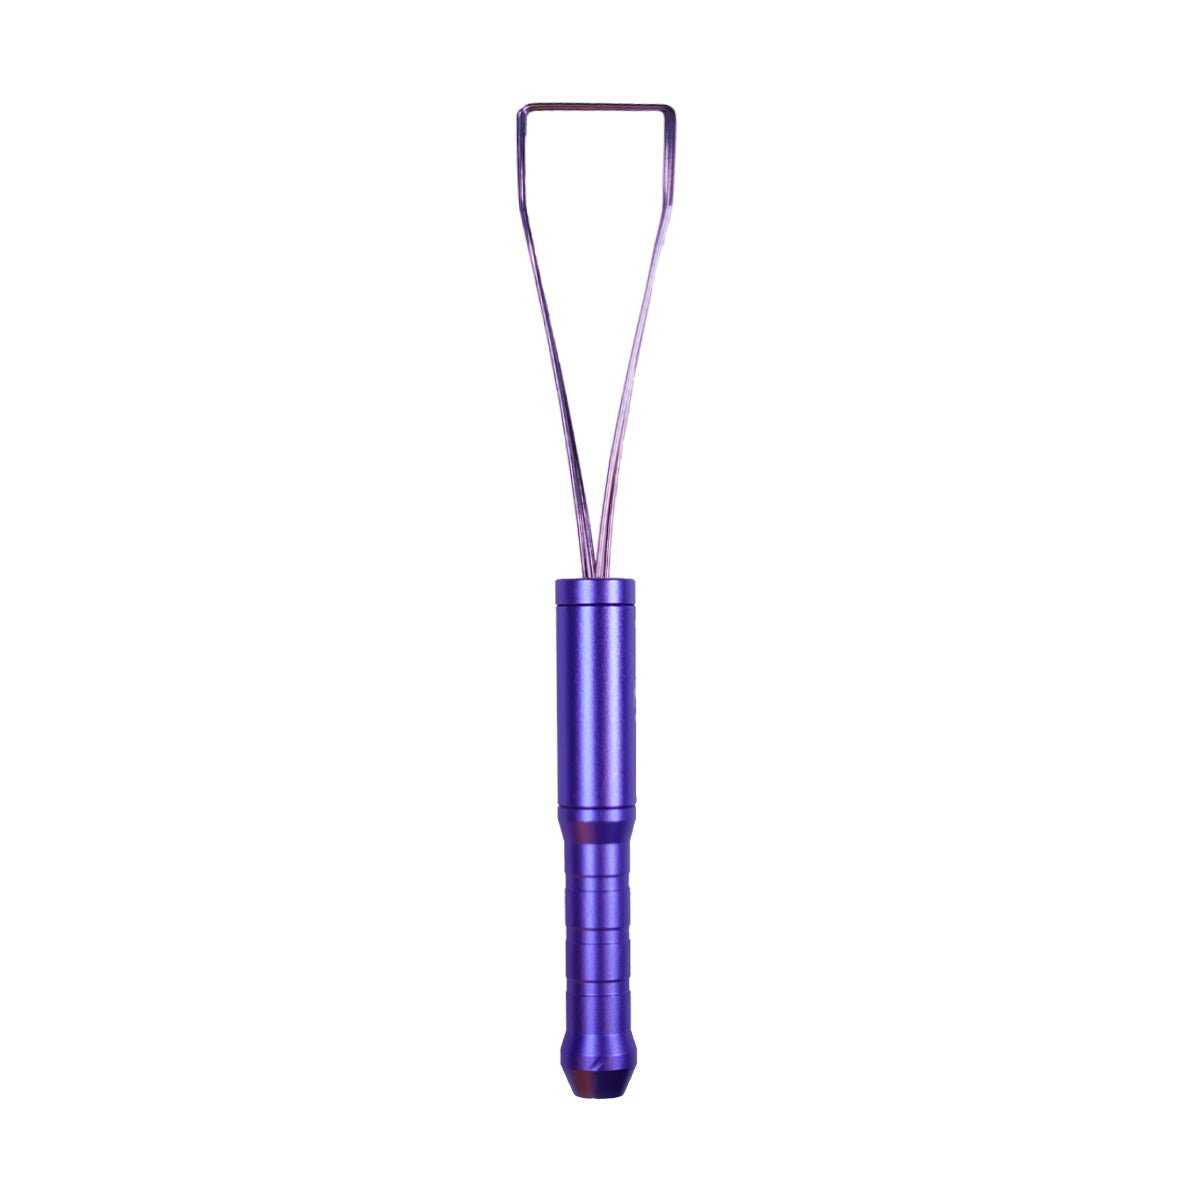 Keycap Puller 3-in-1 For Mechanical Keyboard - Purple - مزيل مفاتيح - Store 974 | ستور ٩٧٤